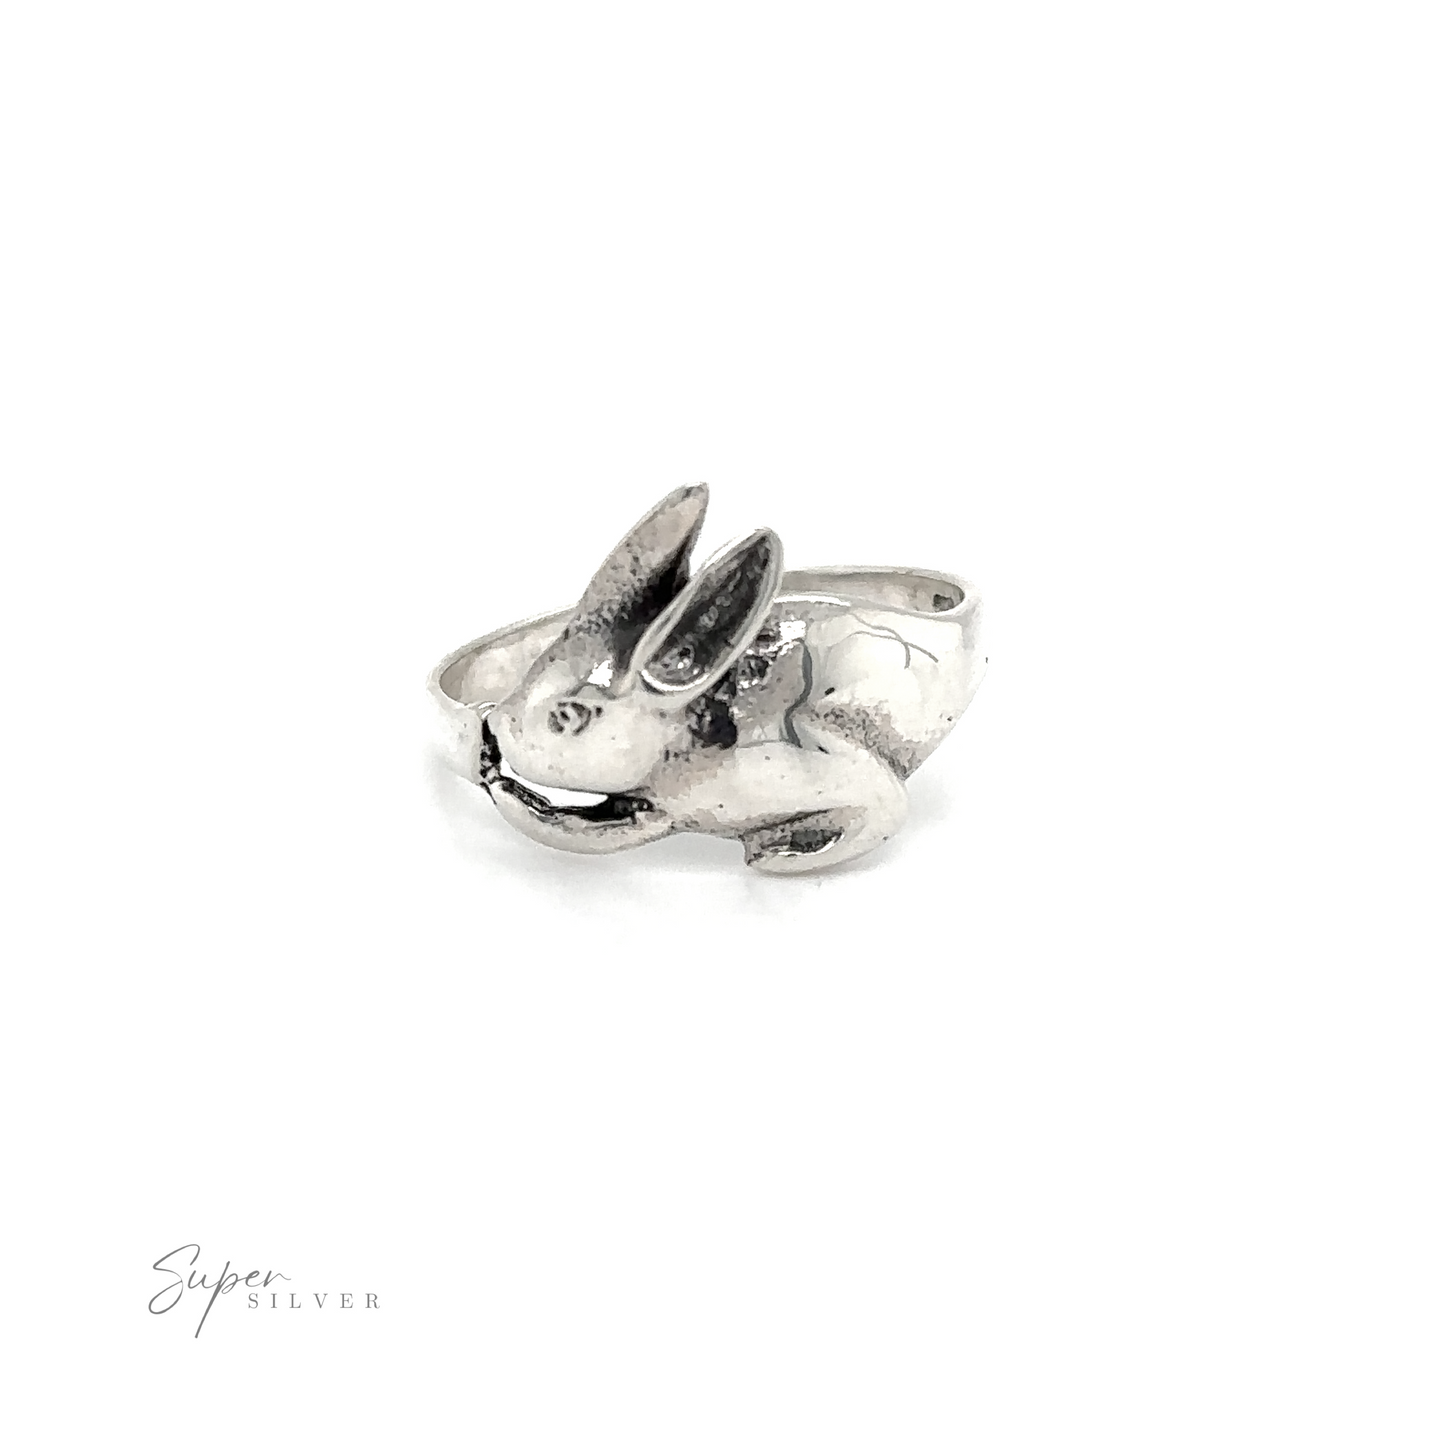 This Rabbit Ring embodies innocence with its delicate and charming design. Crafted in silver, this enchanting accessory captures the essence of a playful bunny.